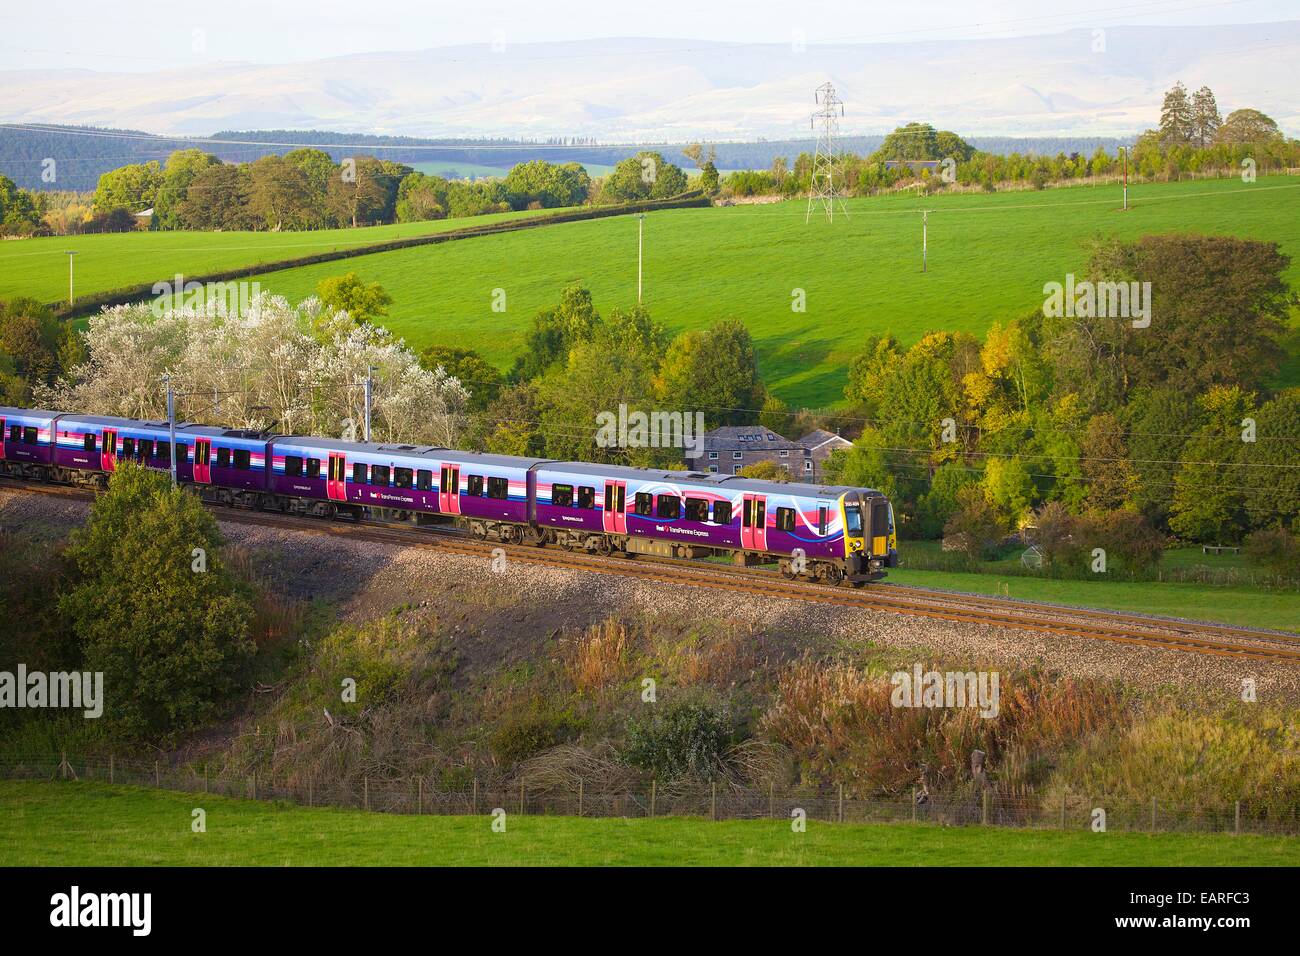 First Group Trans Pennine Express, Class 185 train passing Strickland Mill, Great Strickland, Cumbria, West Coast Main Line, UK. Stock Photo